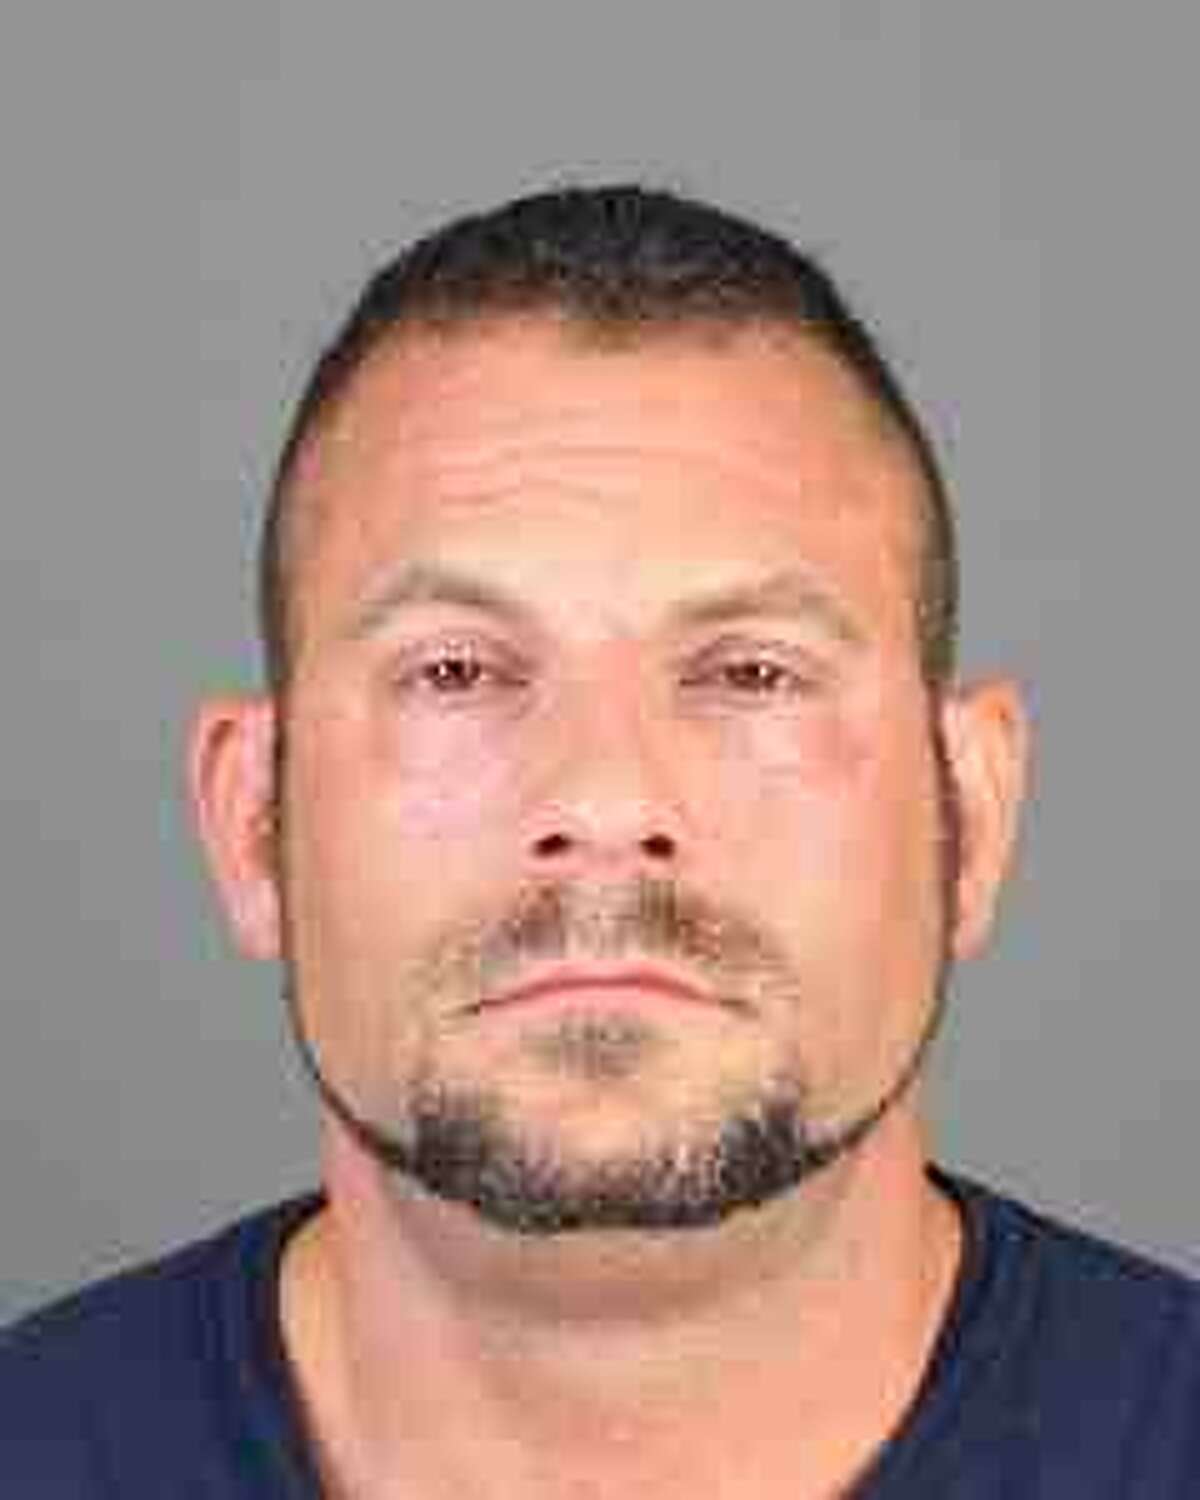 Jeremey Ackner, of Troy, was charged with drug-related offenses on July 10.